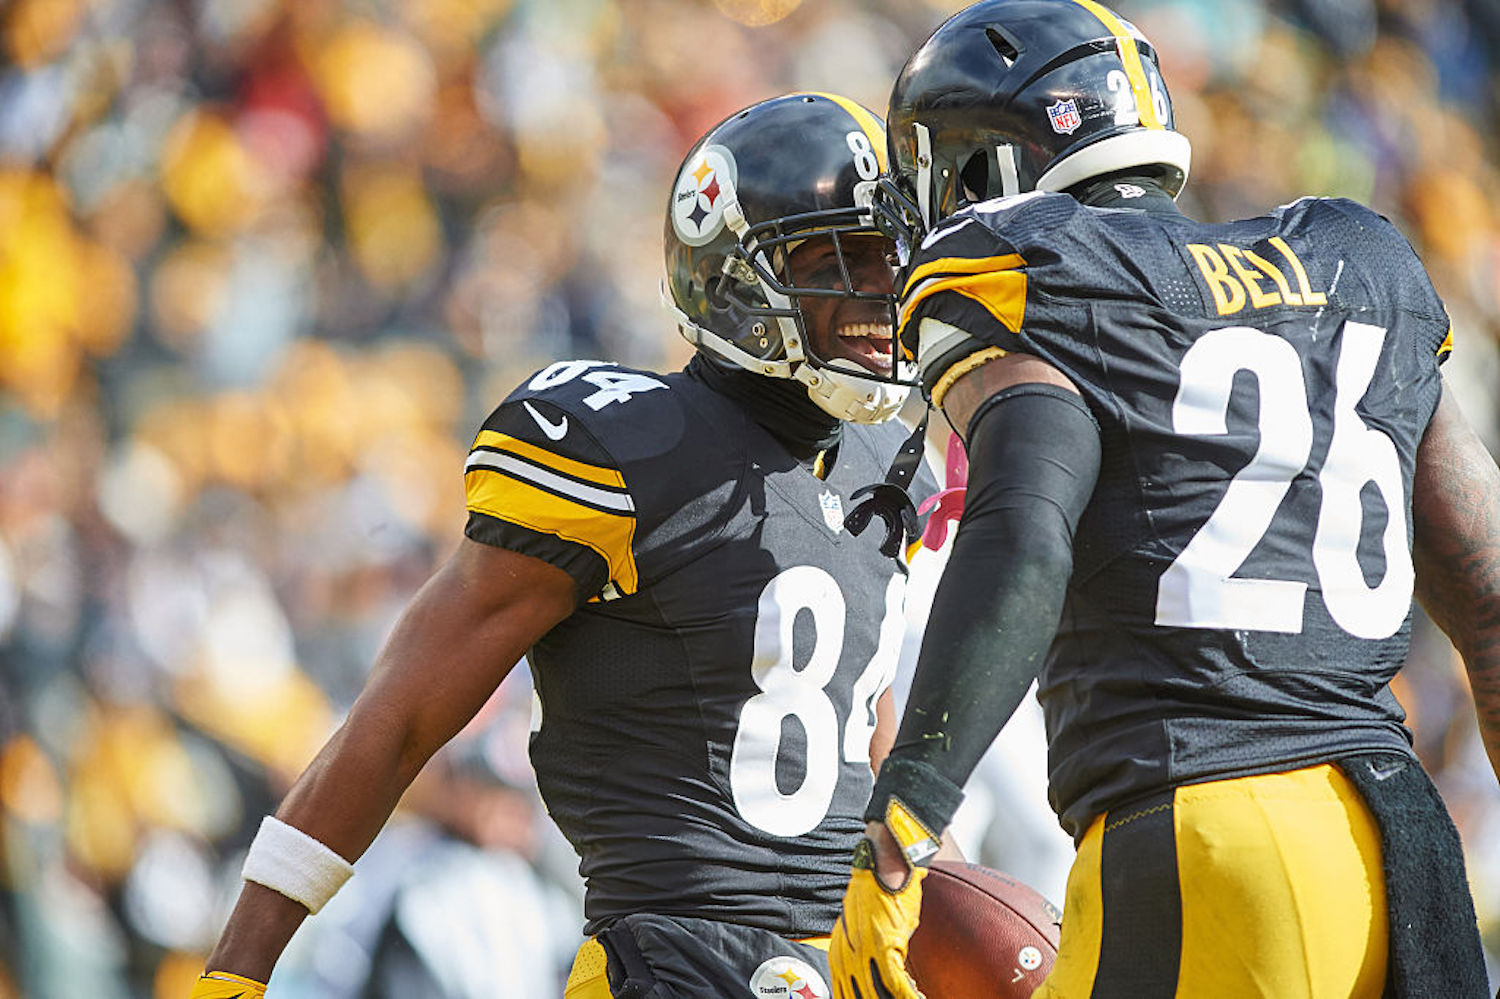 The Meteoric Rise and Drastic Fall of Le’Veon Bell and Antonio Brown